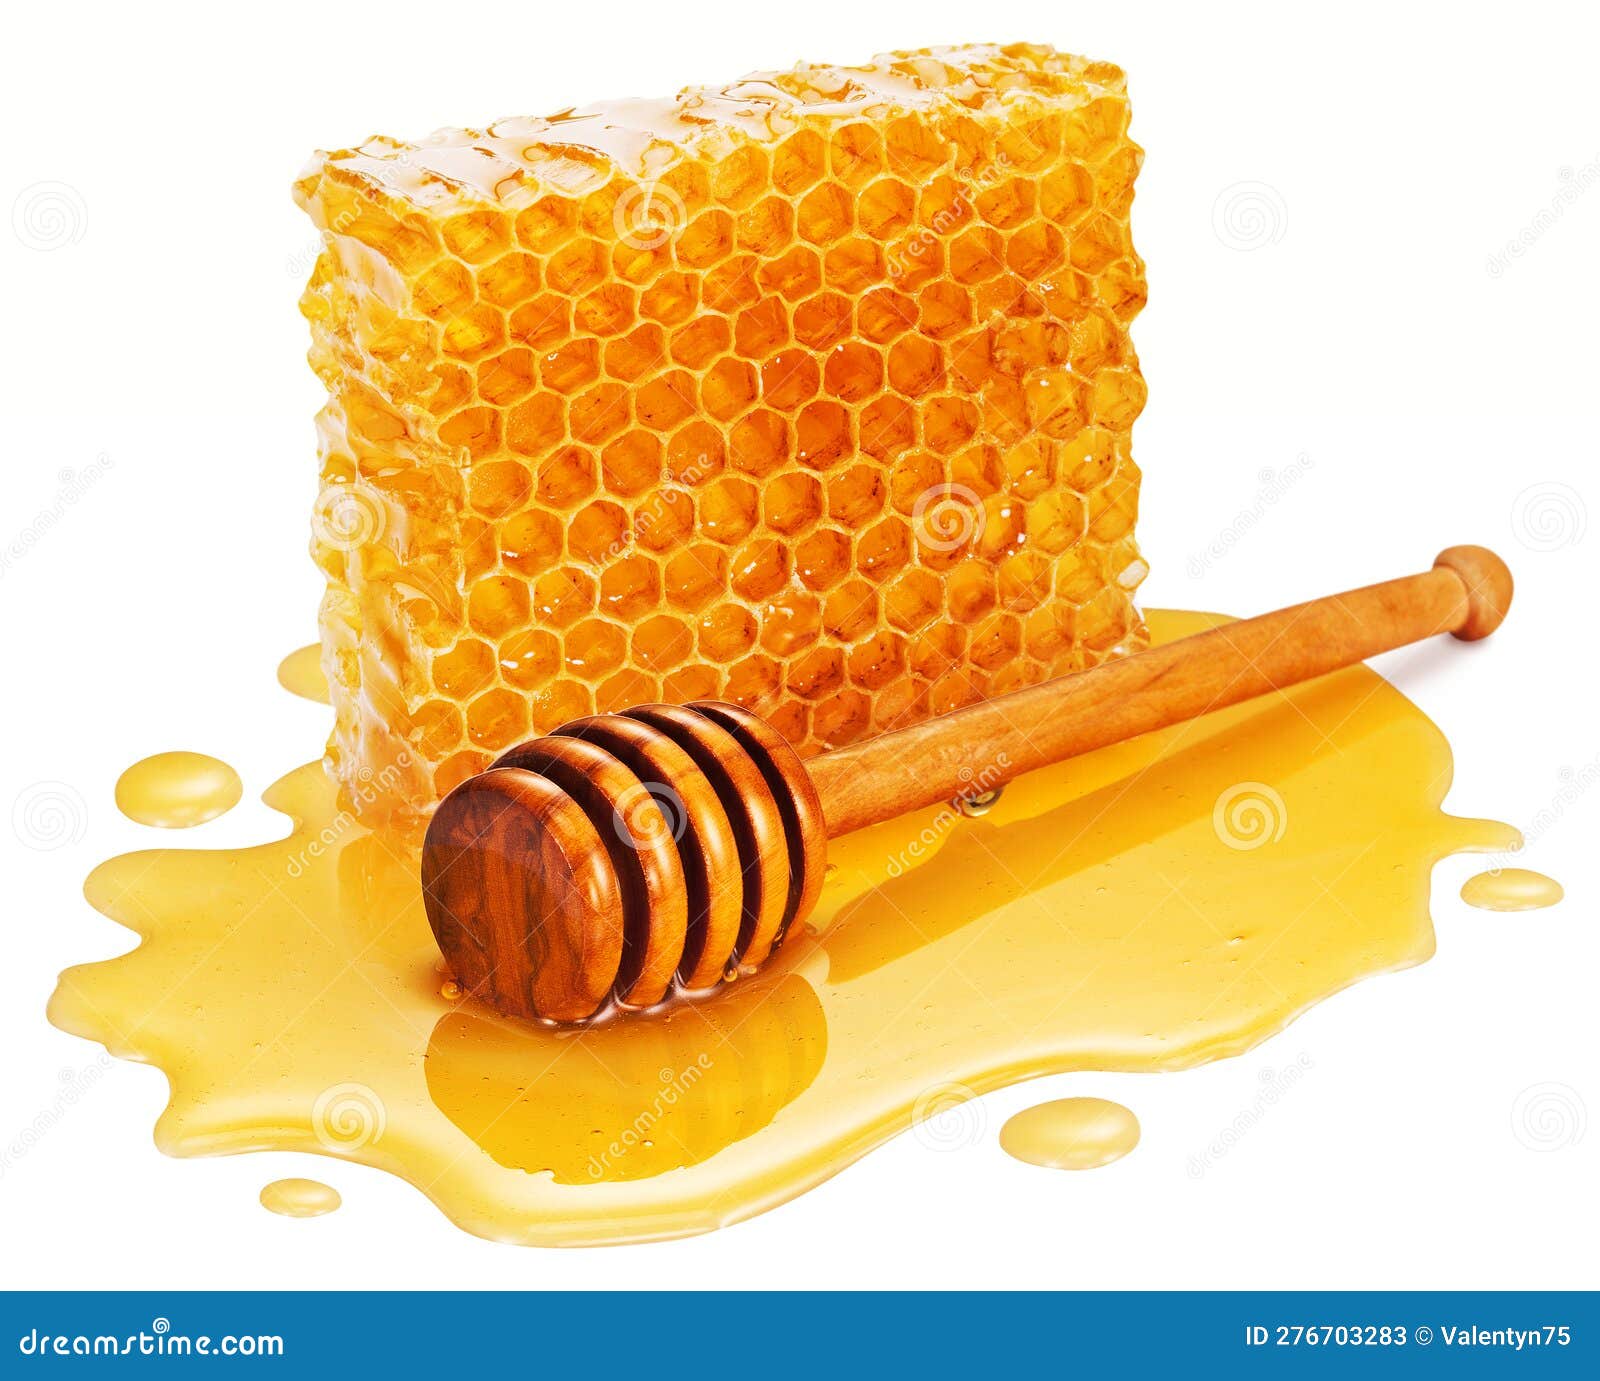 honey wooden dipper (stick) in plash of honey with honey comb on a white background.